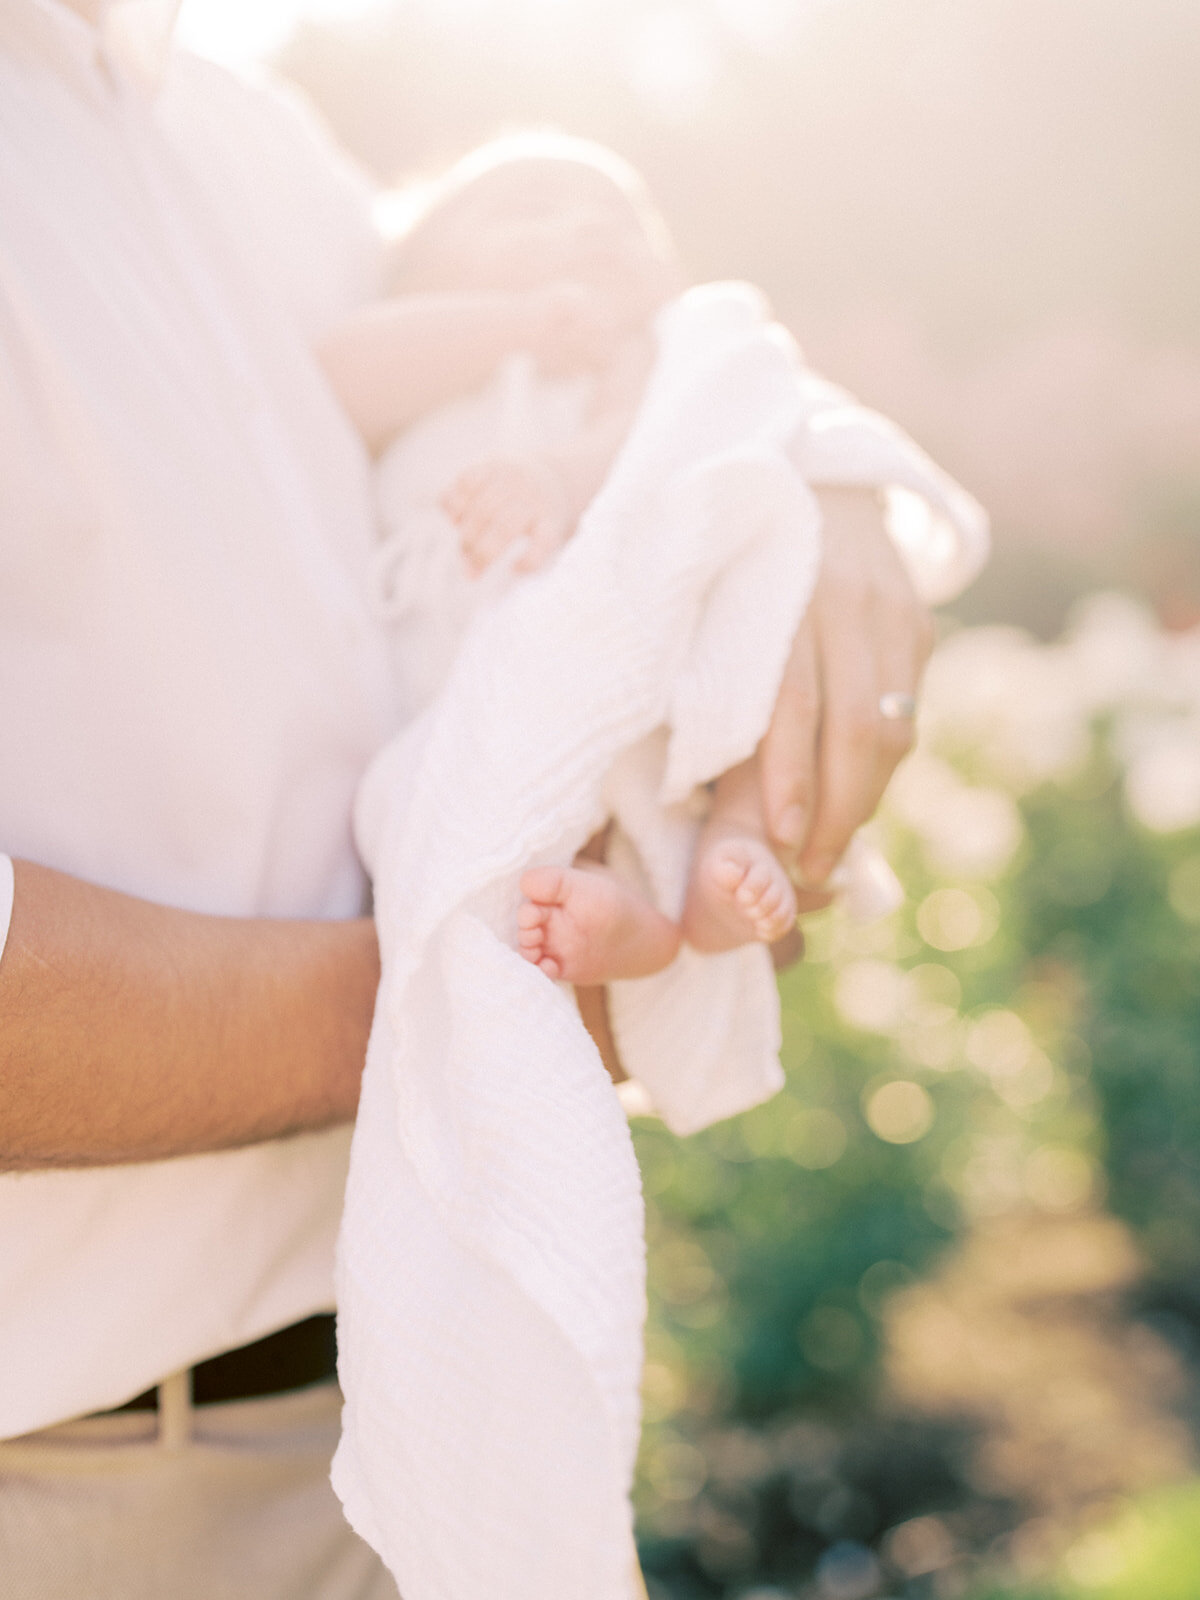 Two small baby feet stick out of a swaddle as the baby is held by her father outdoor.